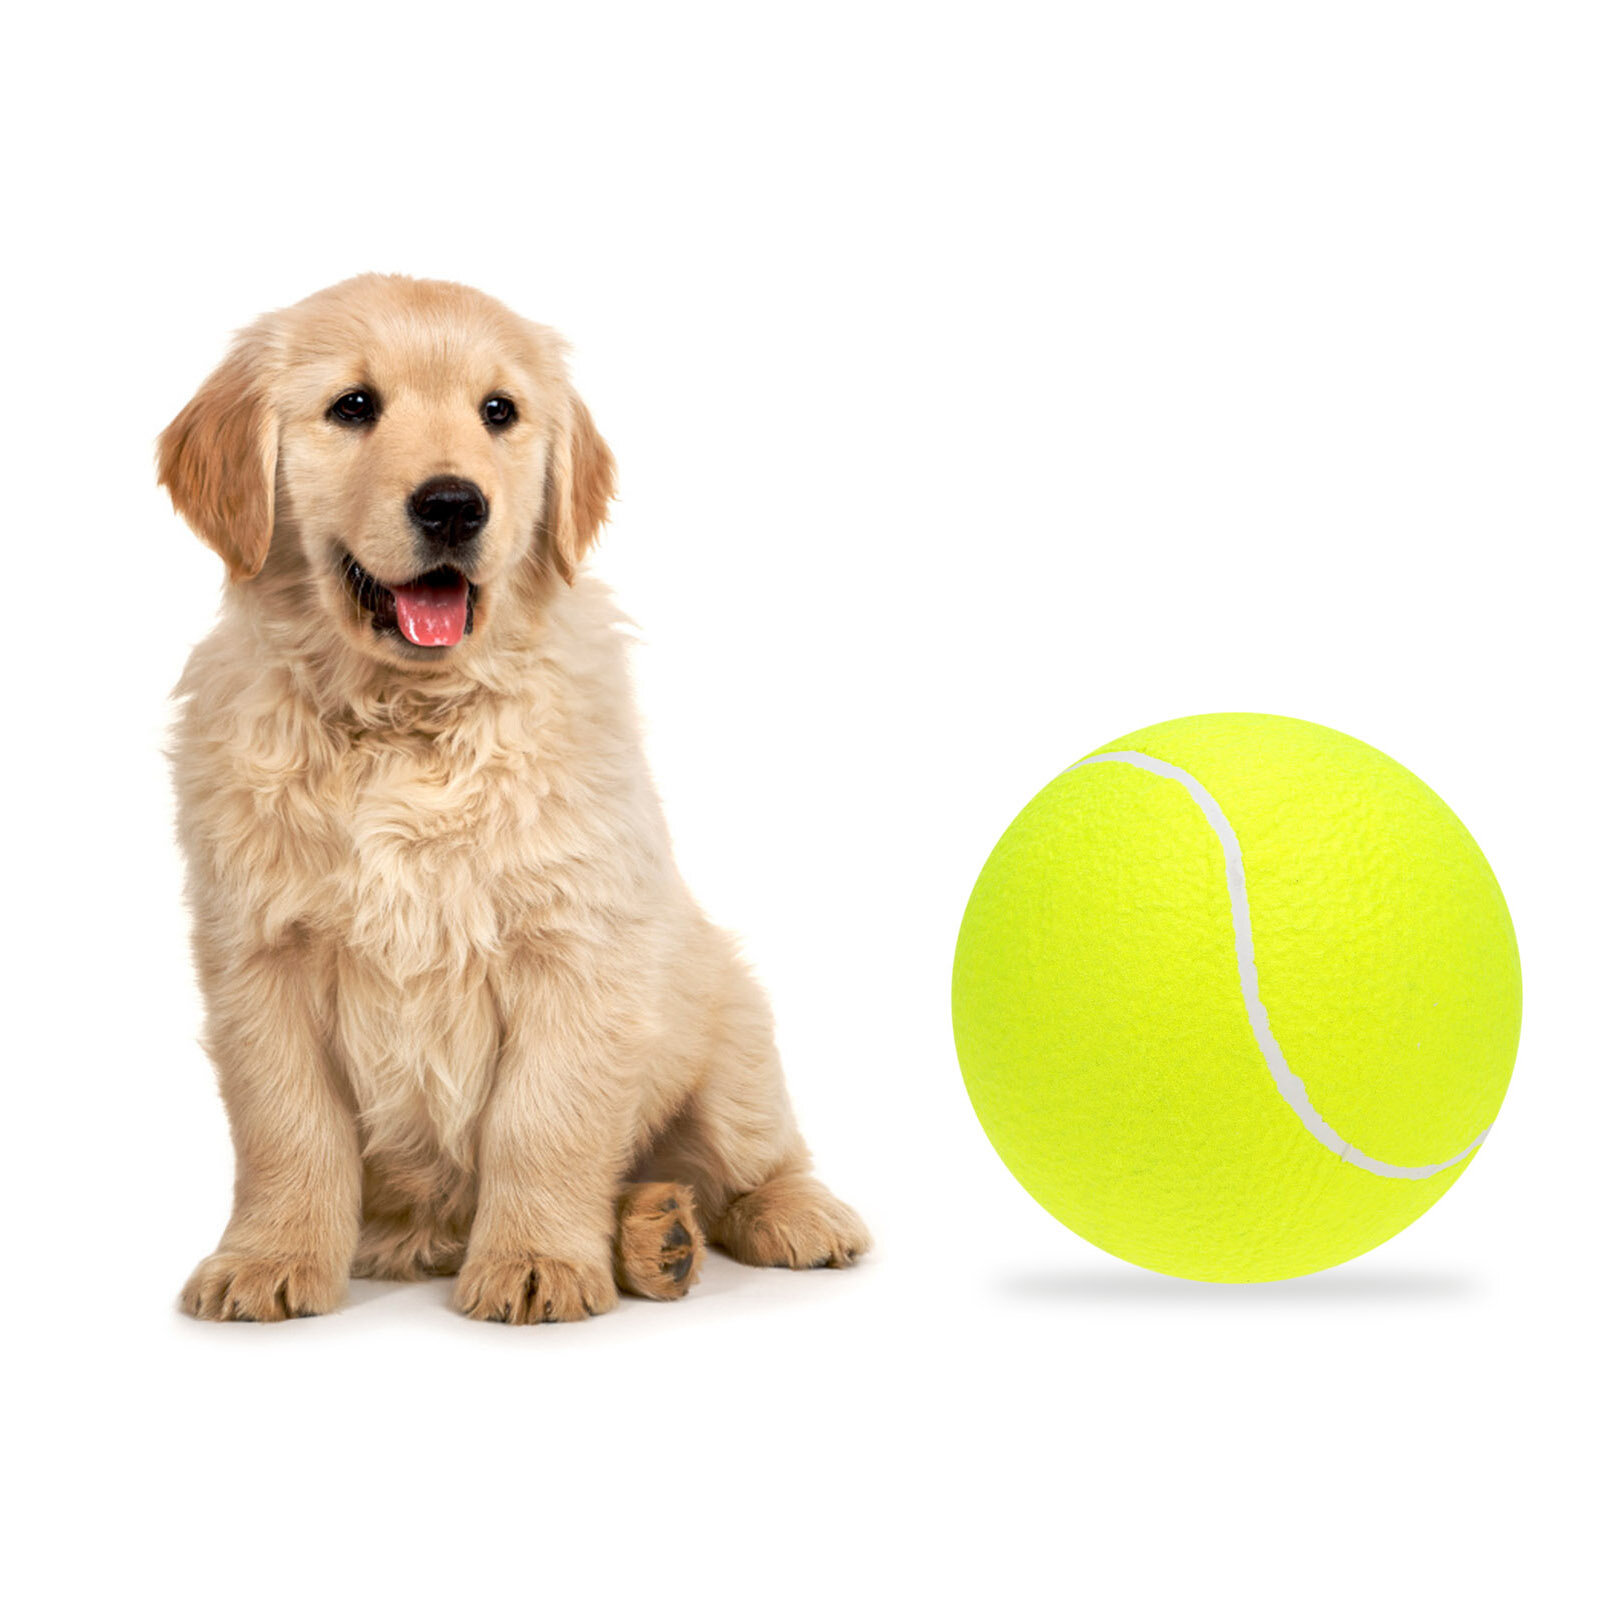 Giant Tennis Ball For Pet Chew Toy Big Inflatable Tennis Ball Signature Mega Jumbo Pet Toy Ball Supplies Outdoor Cricket New In